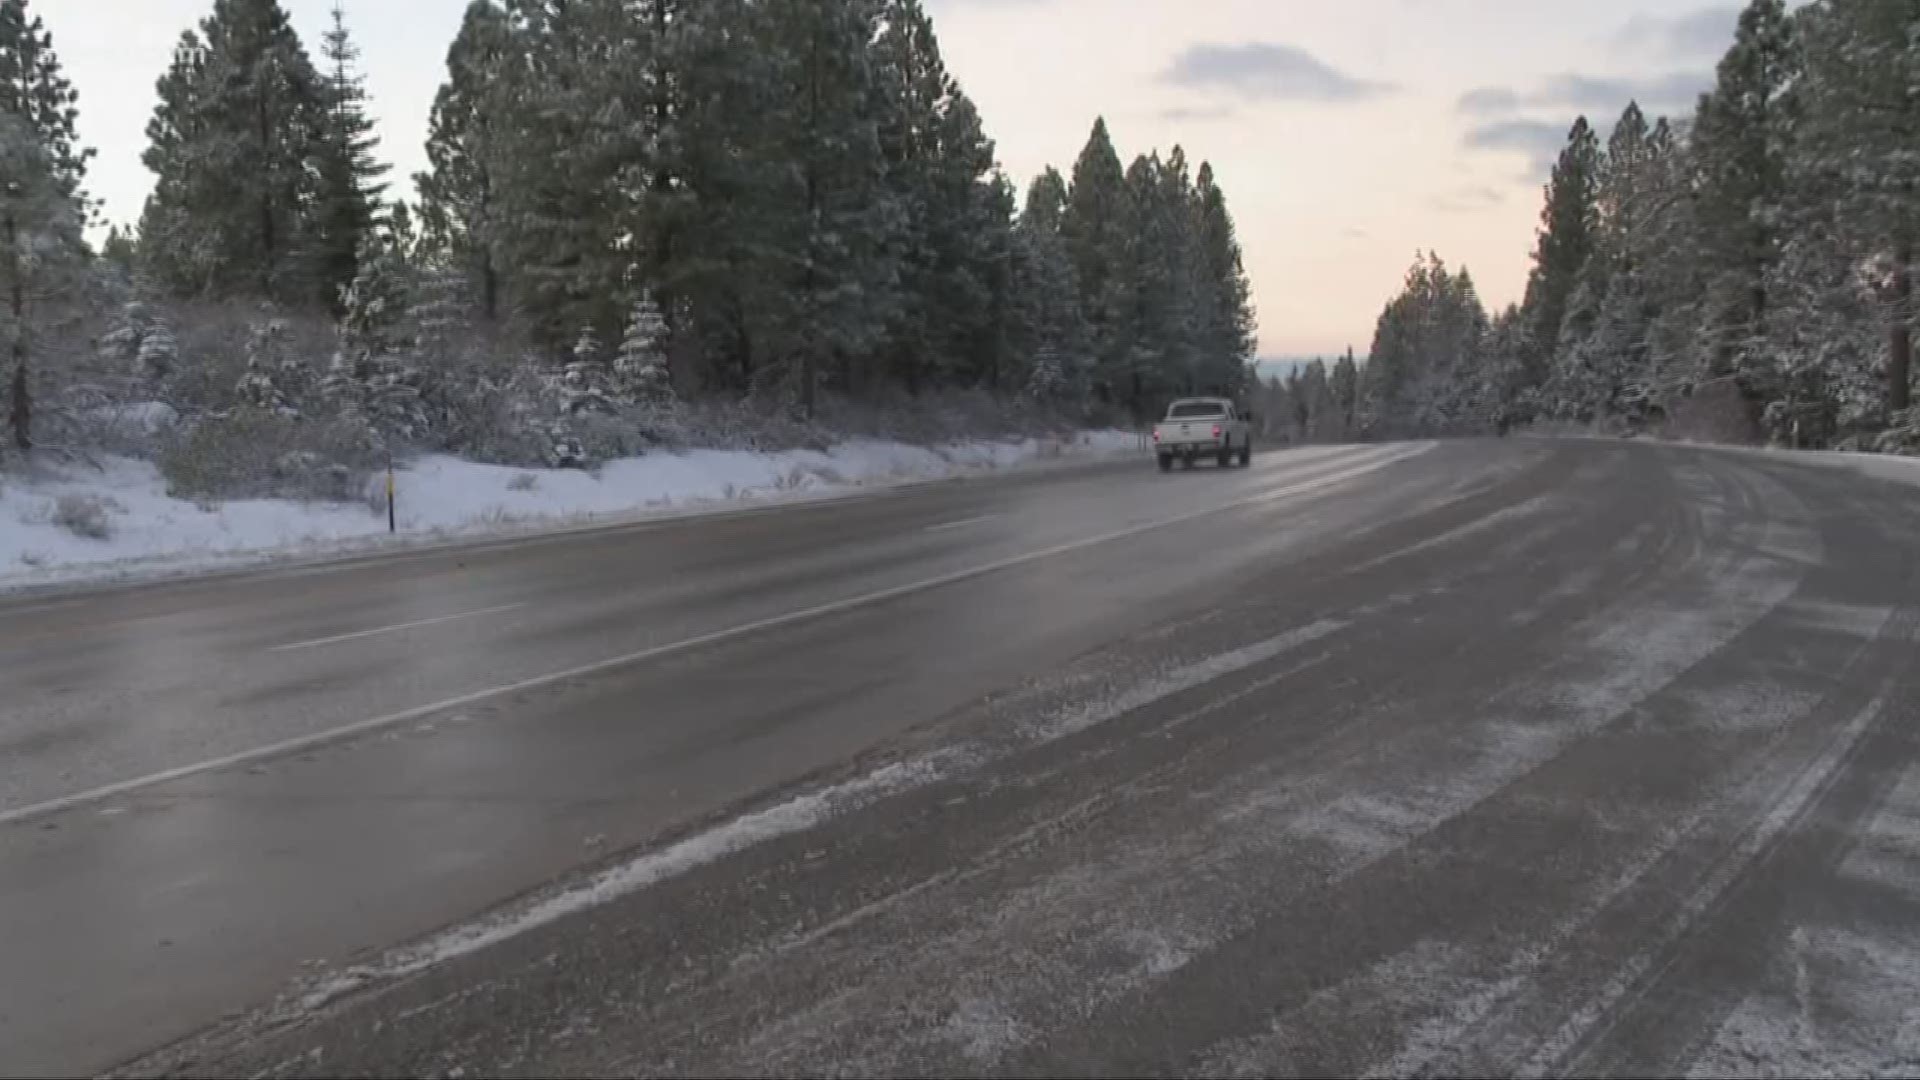 Have weekend plans in the Sierra? Meteorologist Carley Gomez explains what to expect and how to prepare for the commute as cold conditions continue.